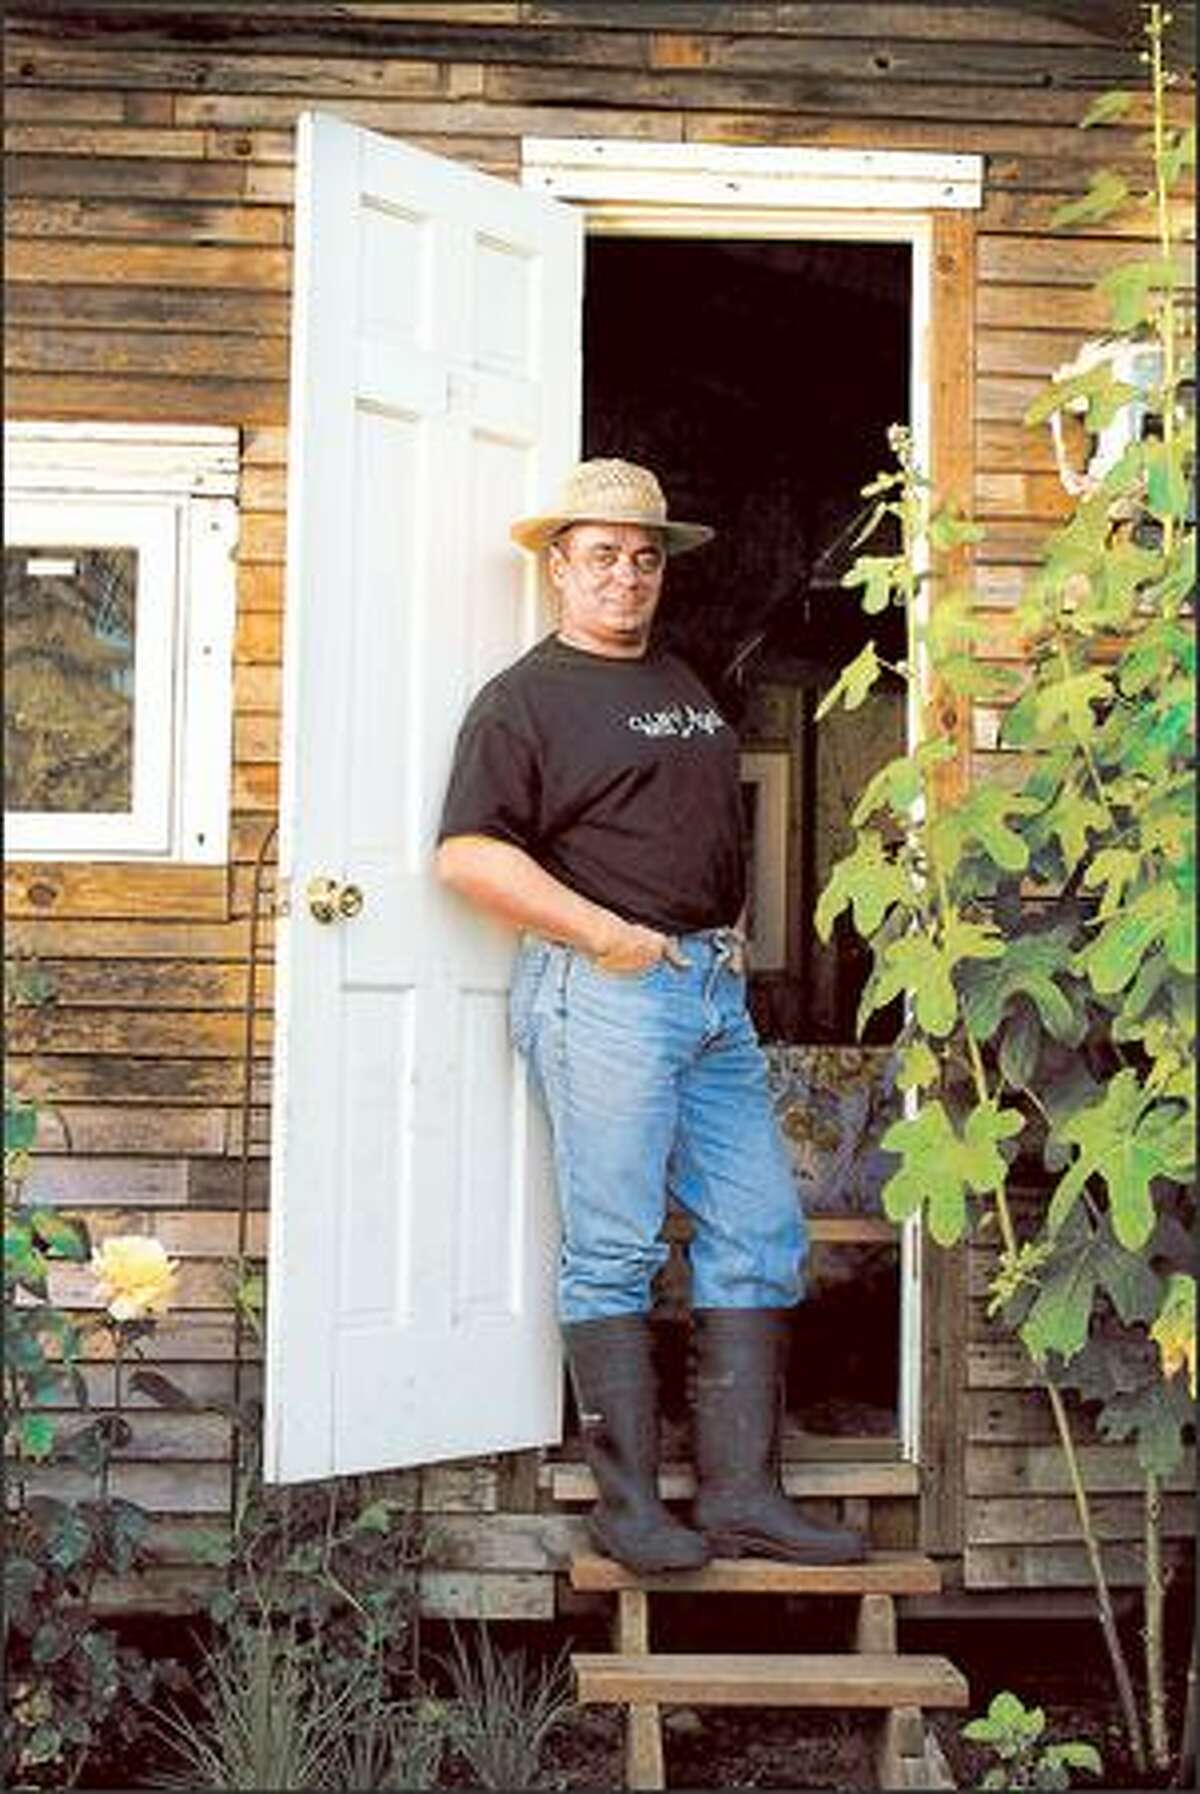 Thierry Rautureau in his home garden, where he and his wife grow vegetables and herbs, some of which are used at his nearby Madison Valley restaurant.